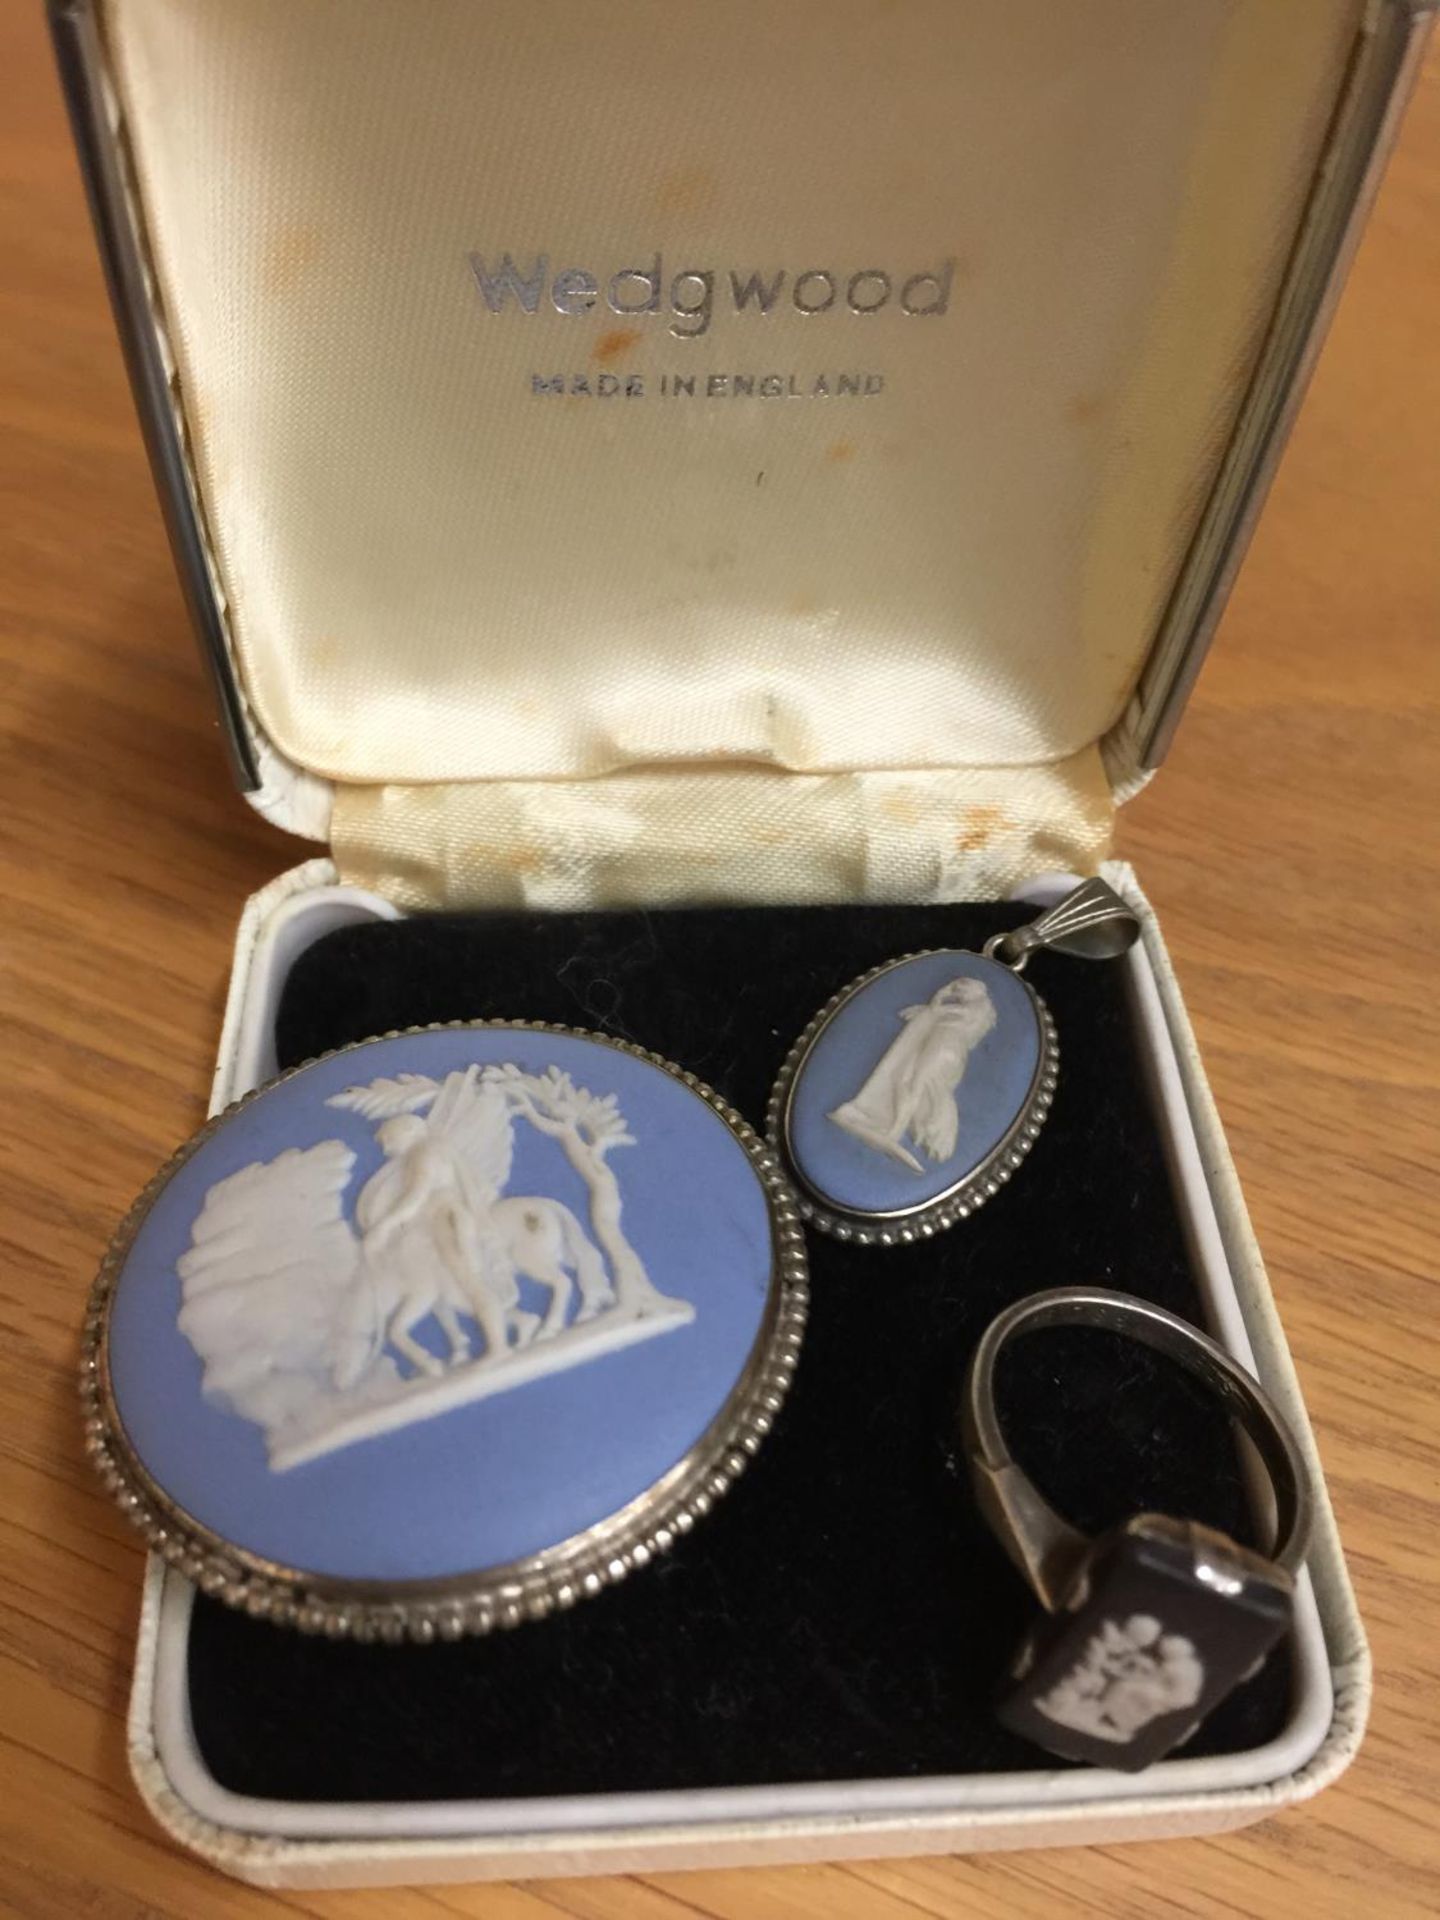 THREE SILVER AND WEDGWOOD ITEMS TO INCLUDE A BROOCH, RING AND PENDANT IN A WEDGEWOOD PRESENTATION - Image 4 of 10